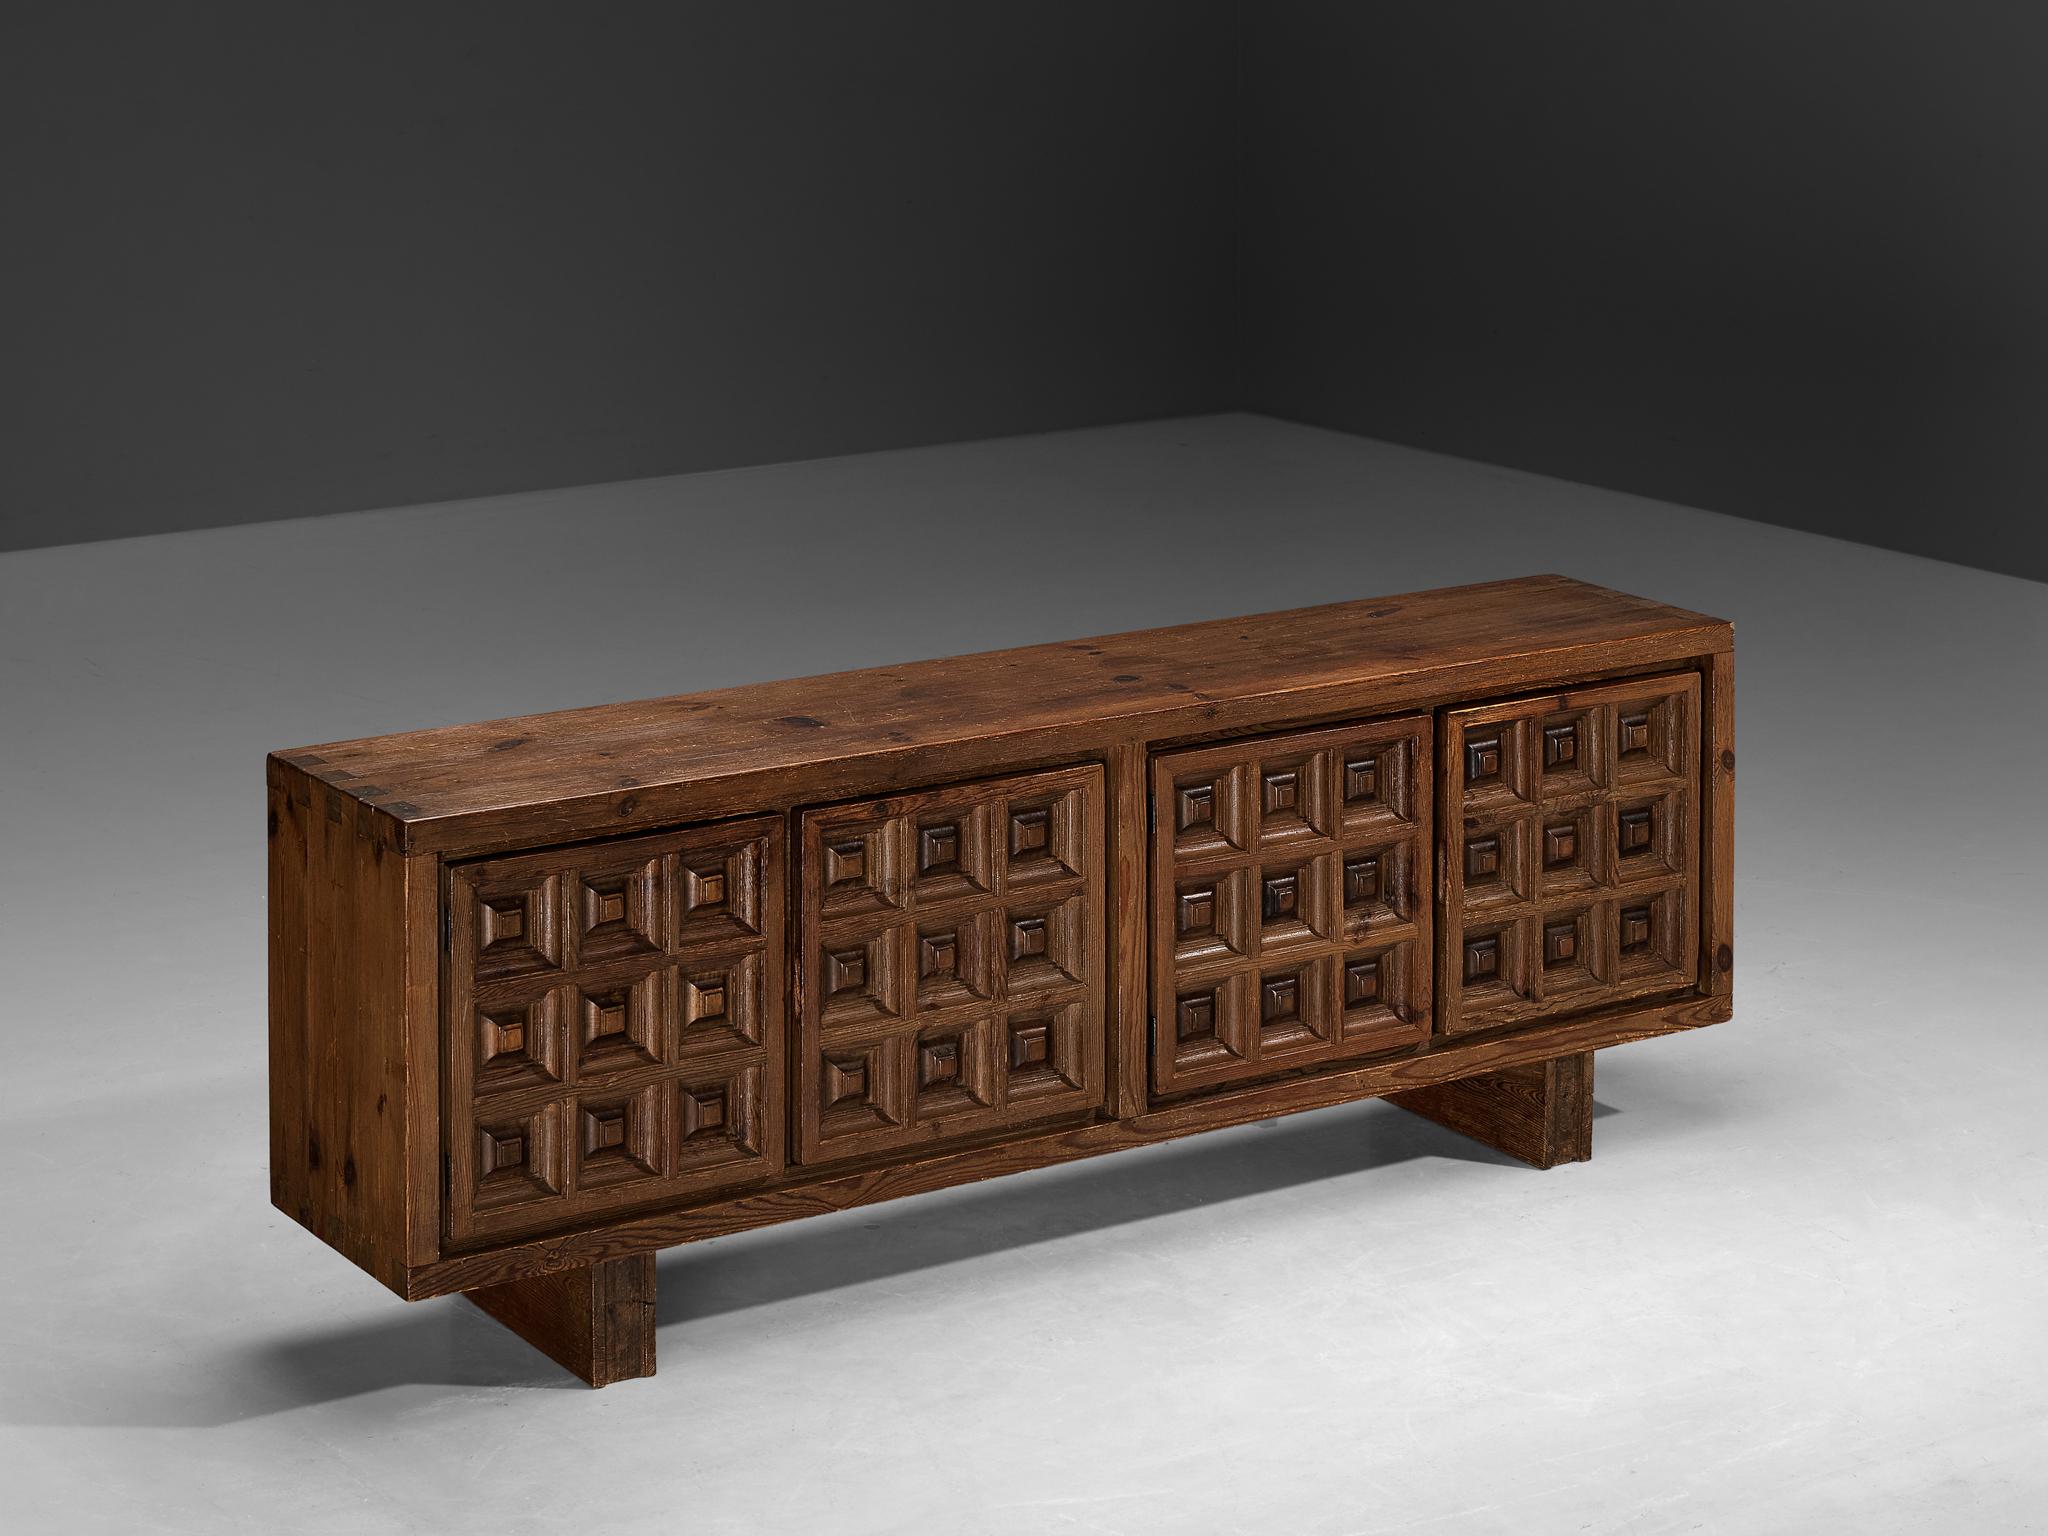 Biosca, sideboard, stained pine, Spain, 1960s.

Outstanding Spanish sideboard that is executed by Biosca in a beautiful way. The door panels feature a relief surface of graphic carved squares. This is very typical for Brutalist style, while the type